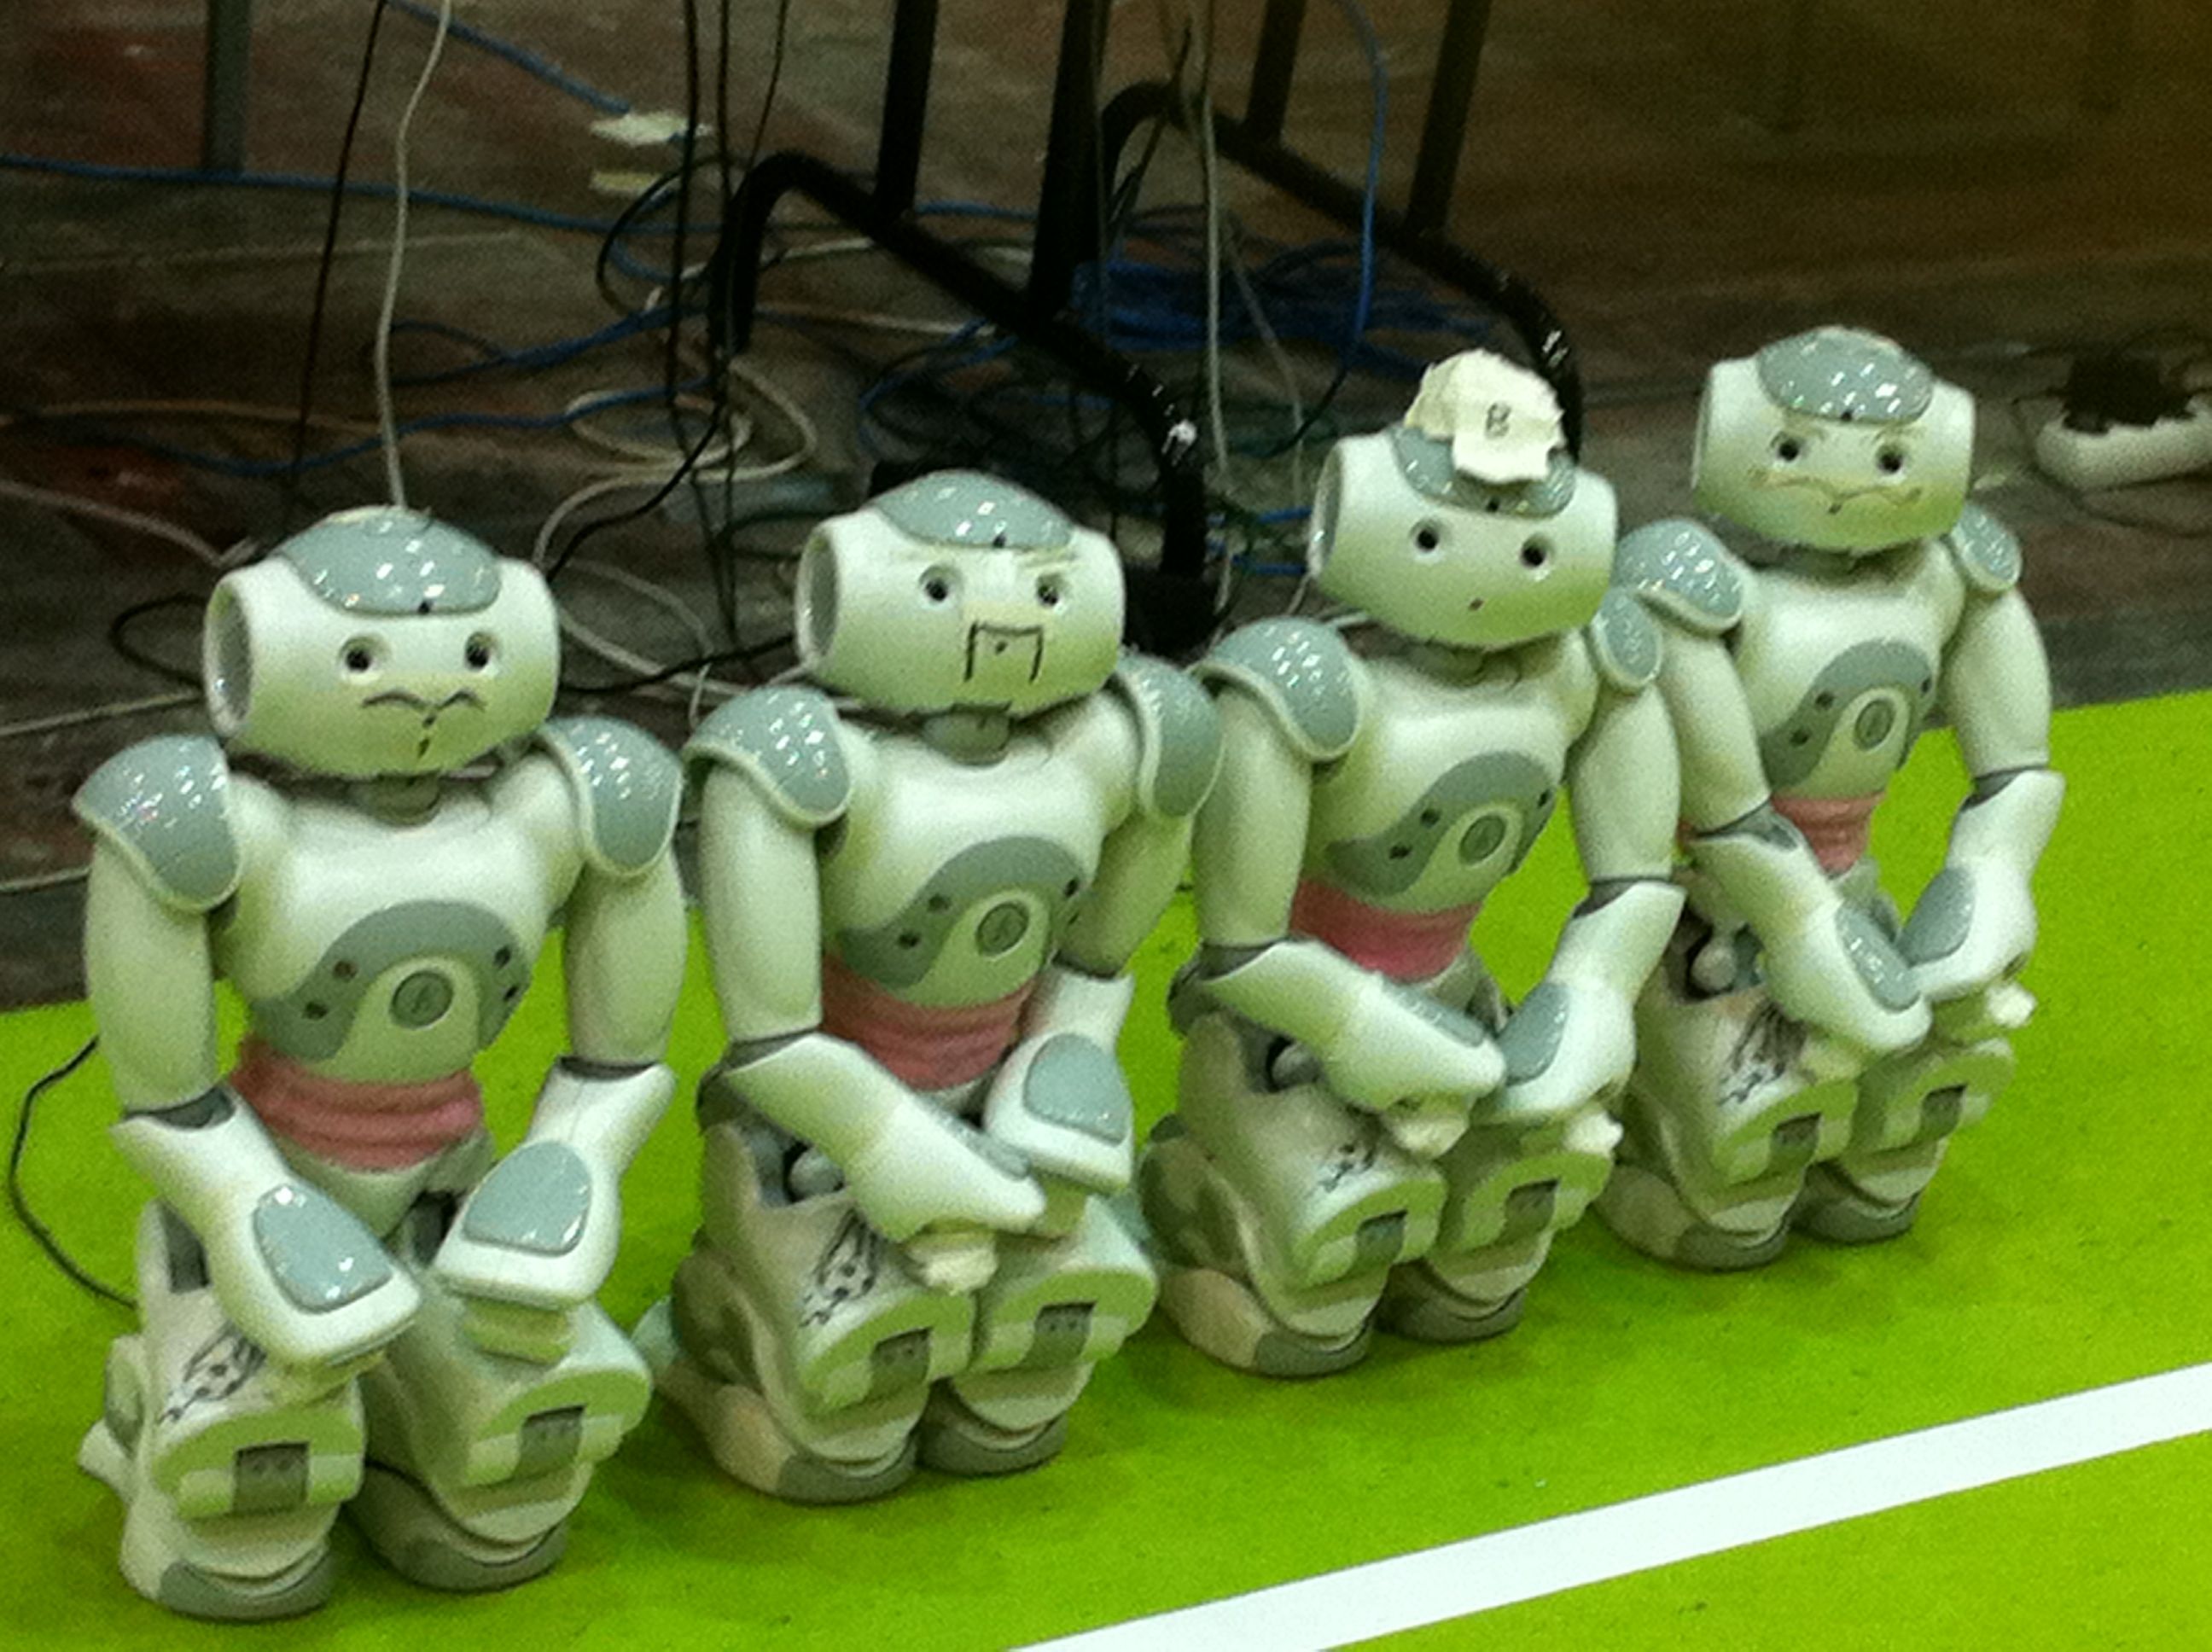 Soccer Playing Robots!